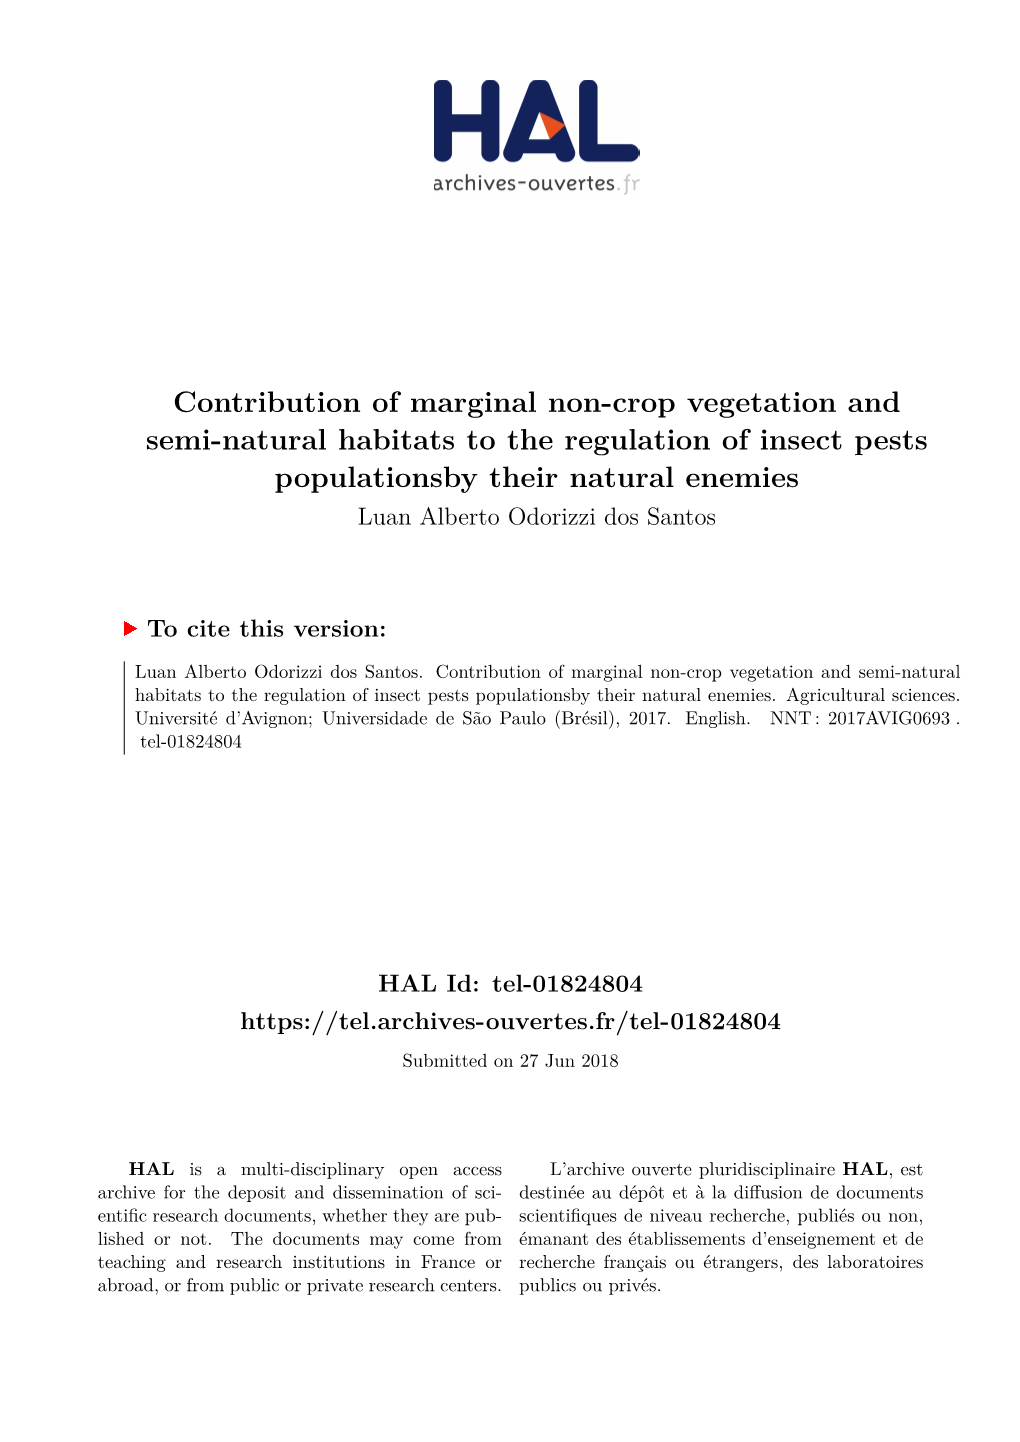 Contribution of Marginal Non-Crop Vegetation and Semi-Natural Habitats to the Regulation of Insect Pests Populationsby Their Natural Enemies